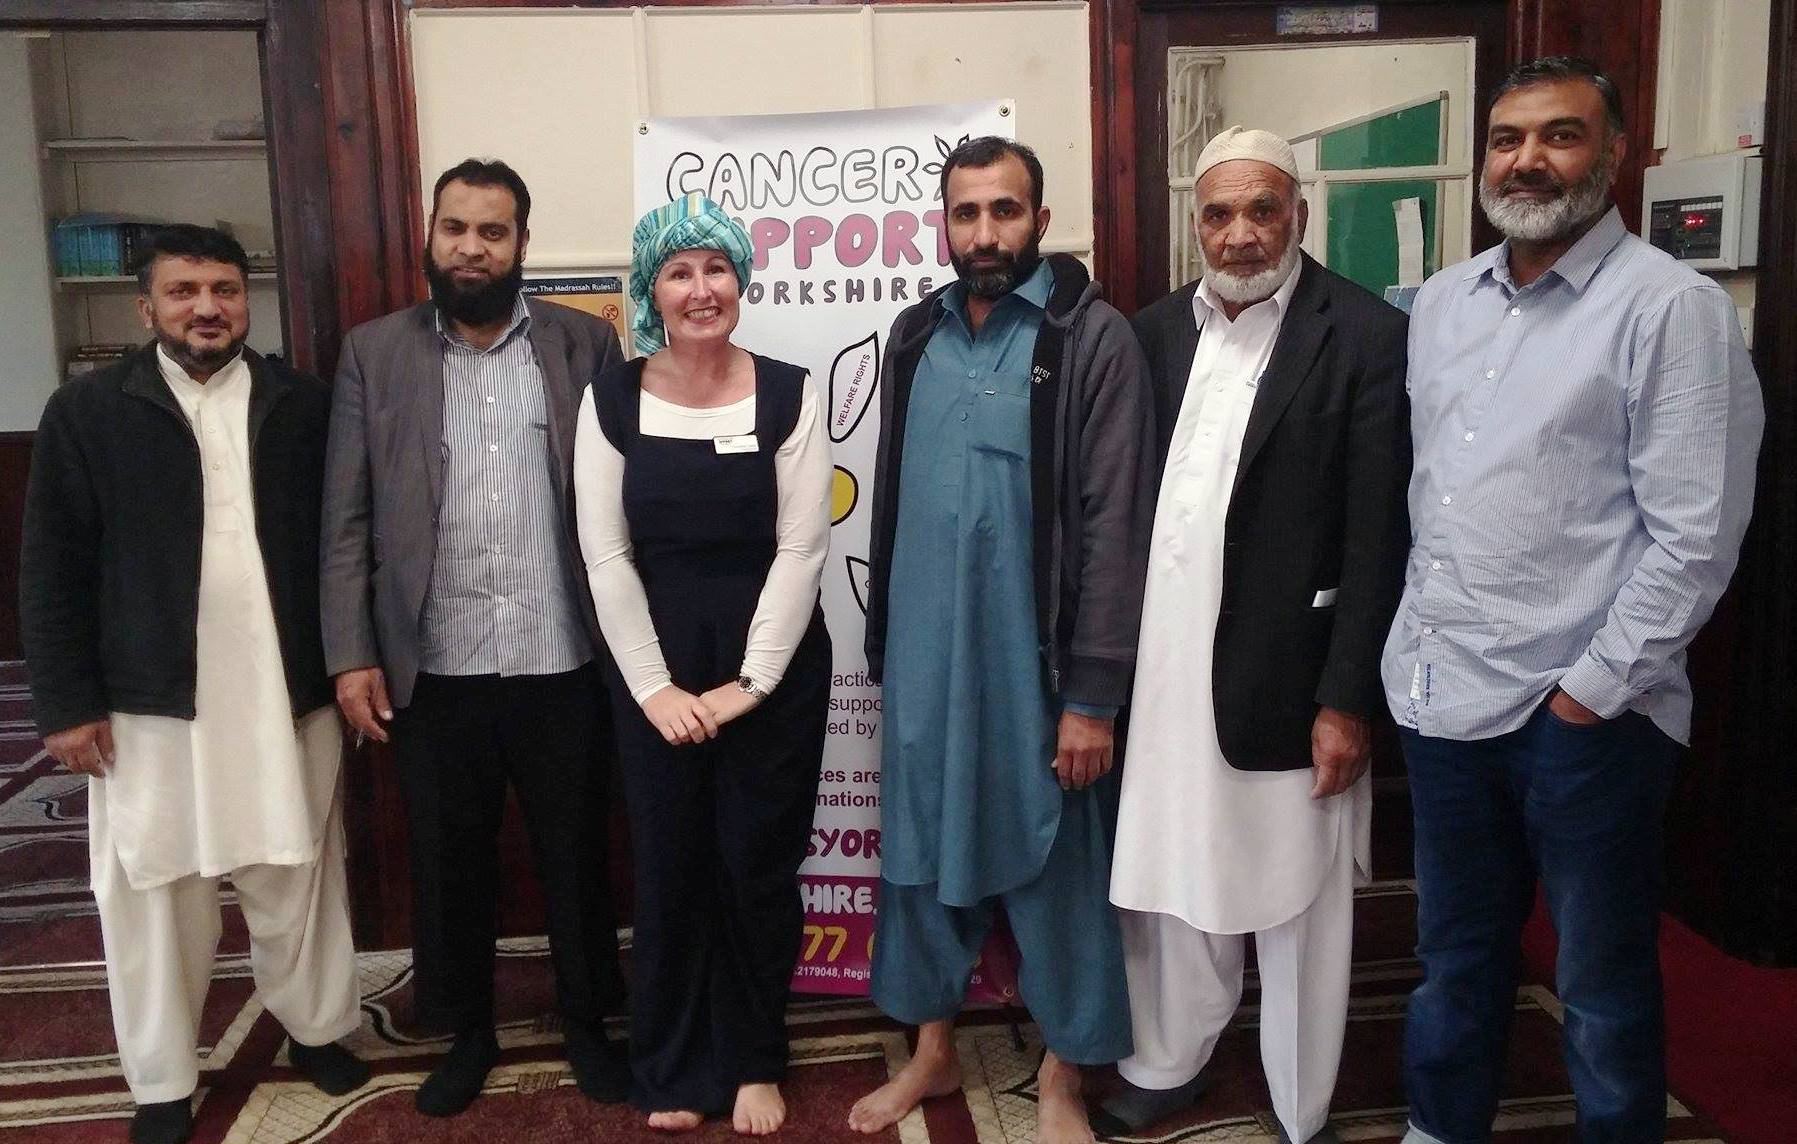 Local mosque raises £1,000 for Yorkshire cancer charity